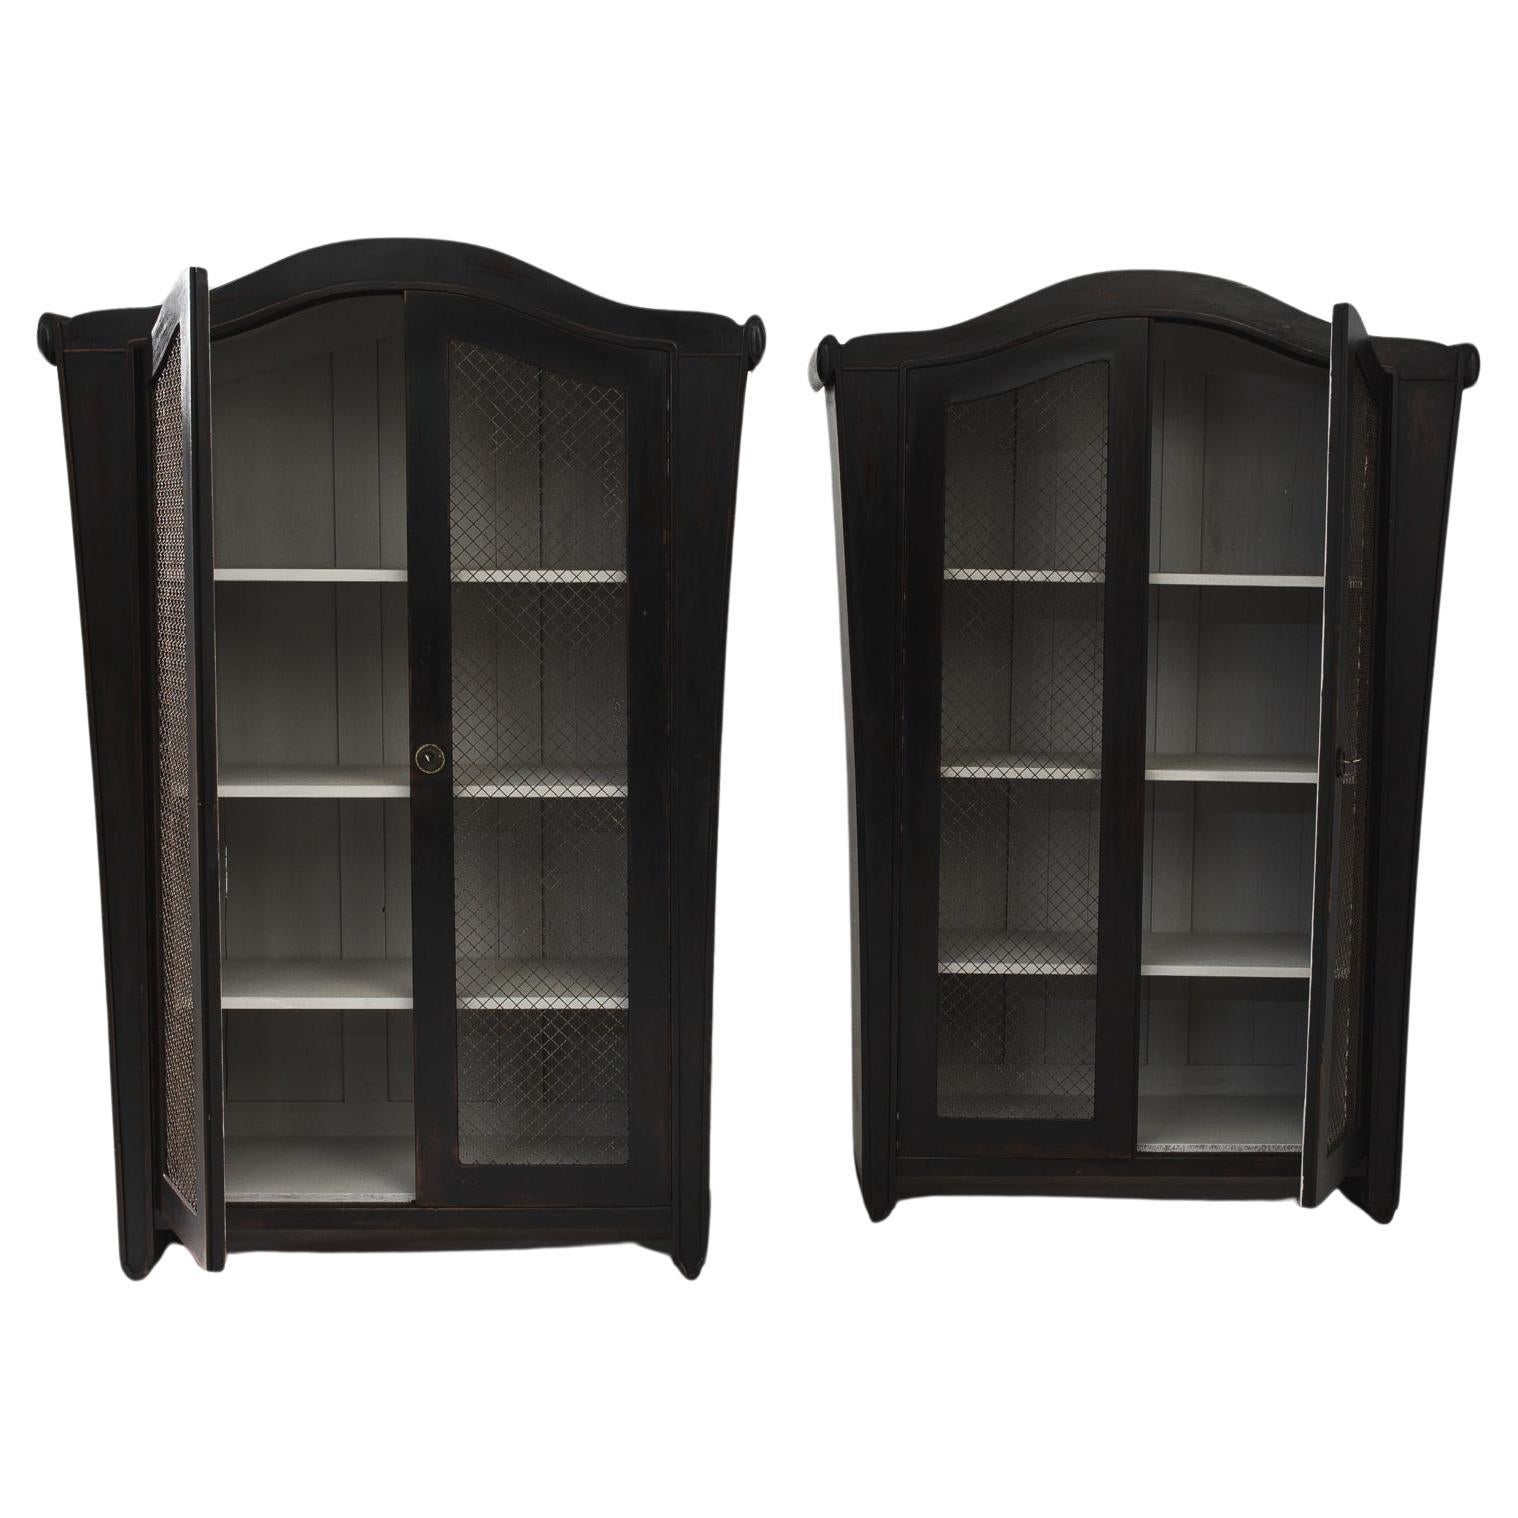 Transporting us to the Art Deco era of 1920s France, this pair of black-patinated wood cabinets exudes the sleek sophistication and avant-garde charm of the period. Crafted with meticulous attention to detail, these cabinets embody the essence of